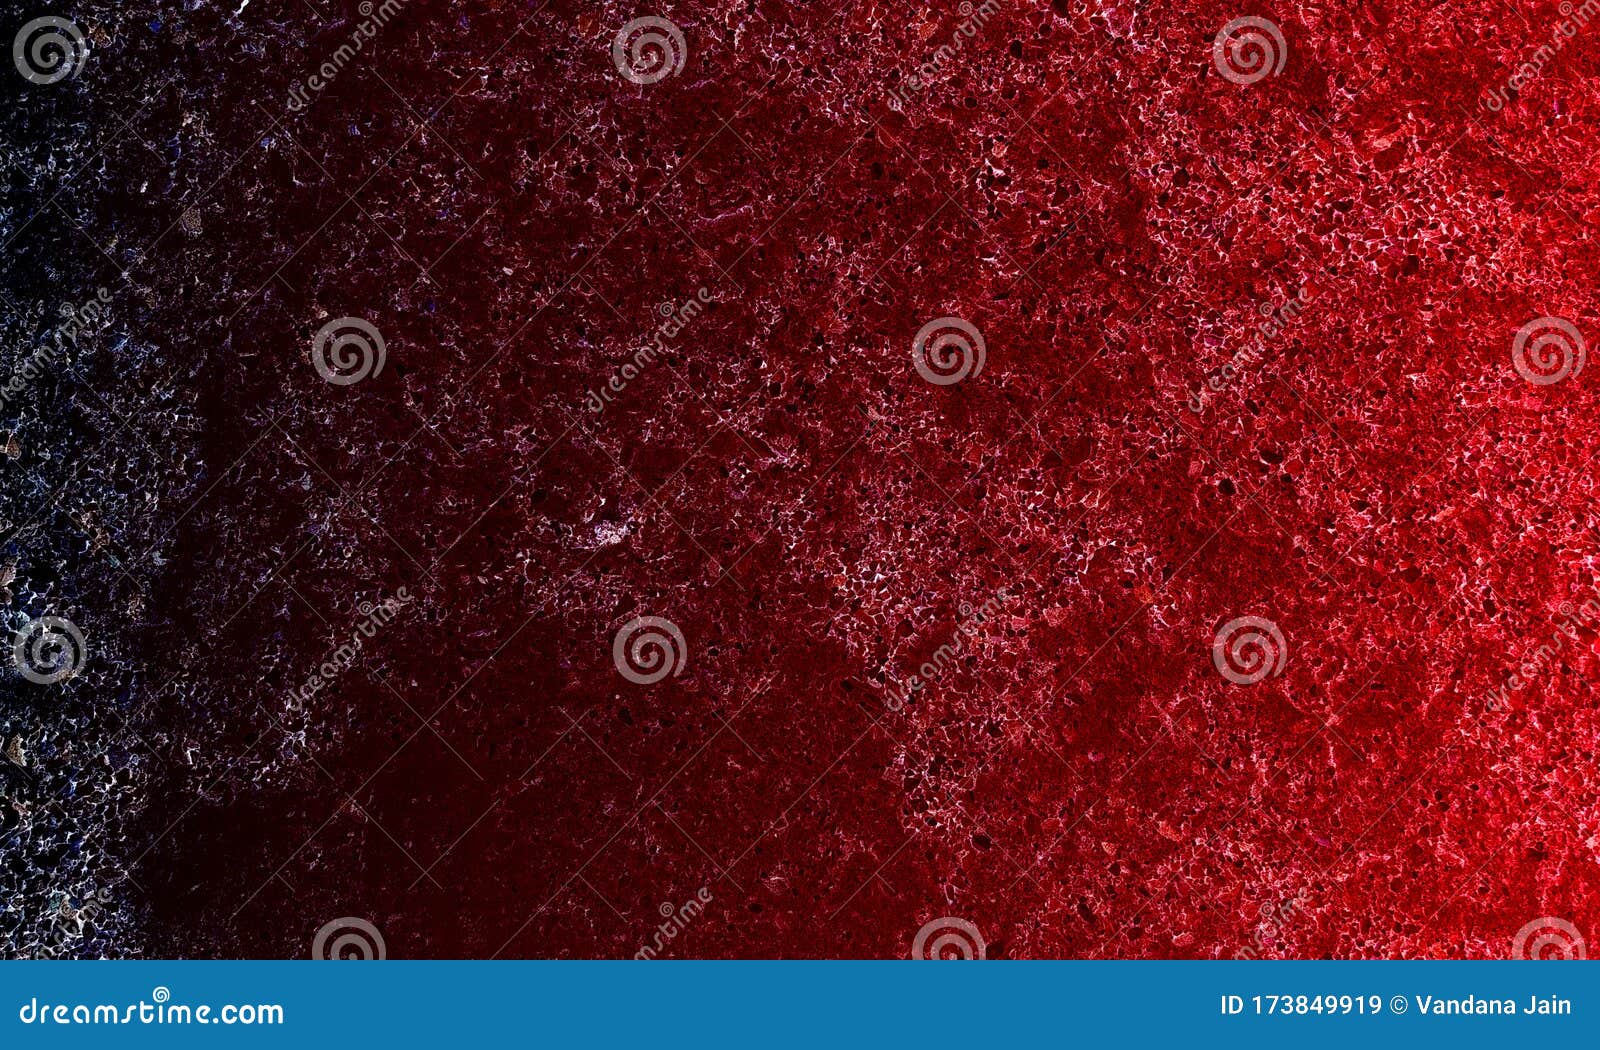 Beautiful Red Background with Texture, Vintage Christmas or Valentines Day  Style Design, Red Wallpaper Background. Stock Image - Image of yellow,  texture: 173849919